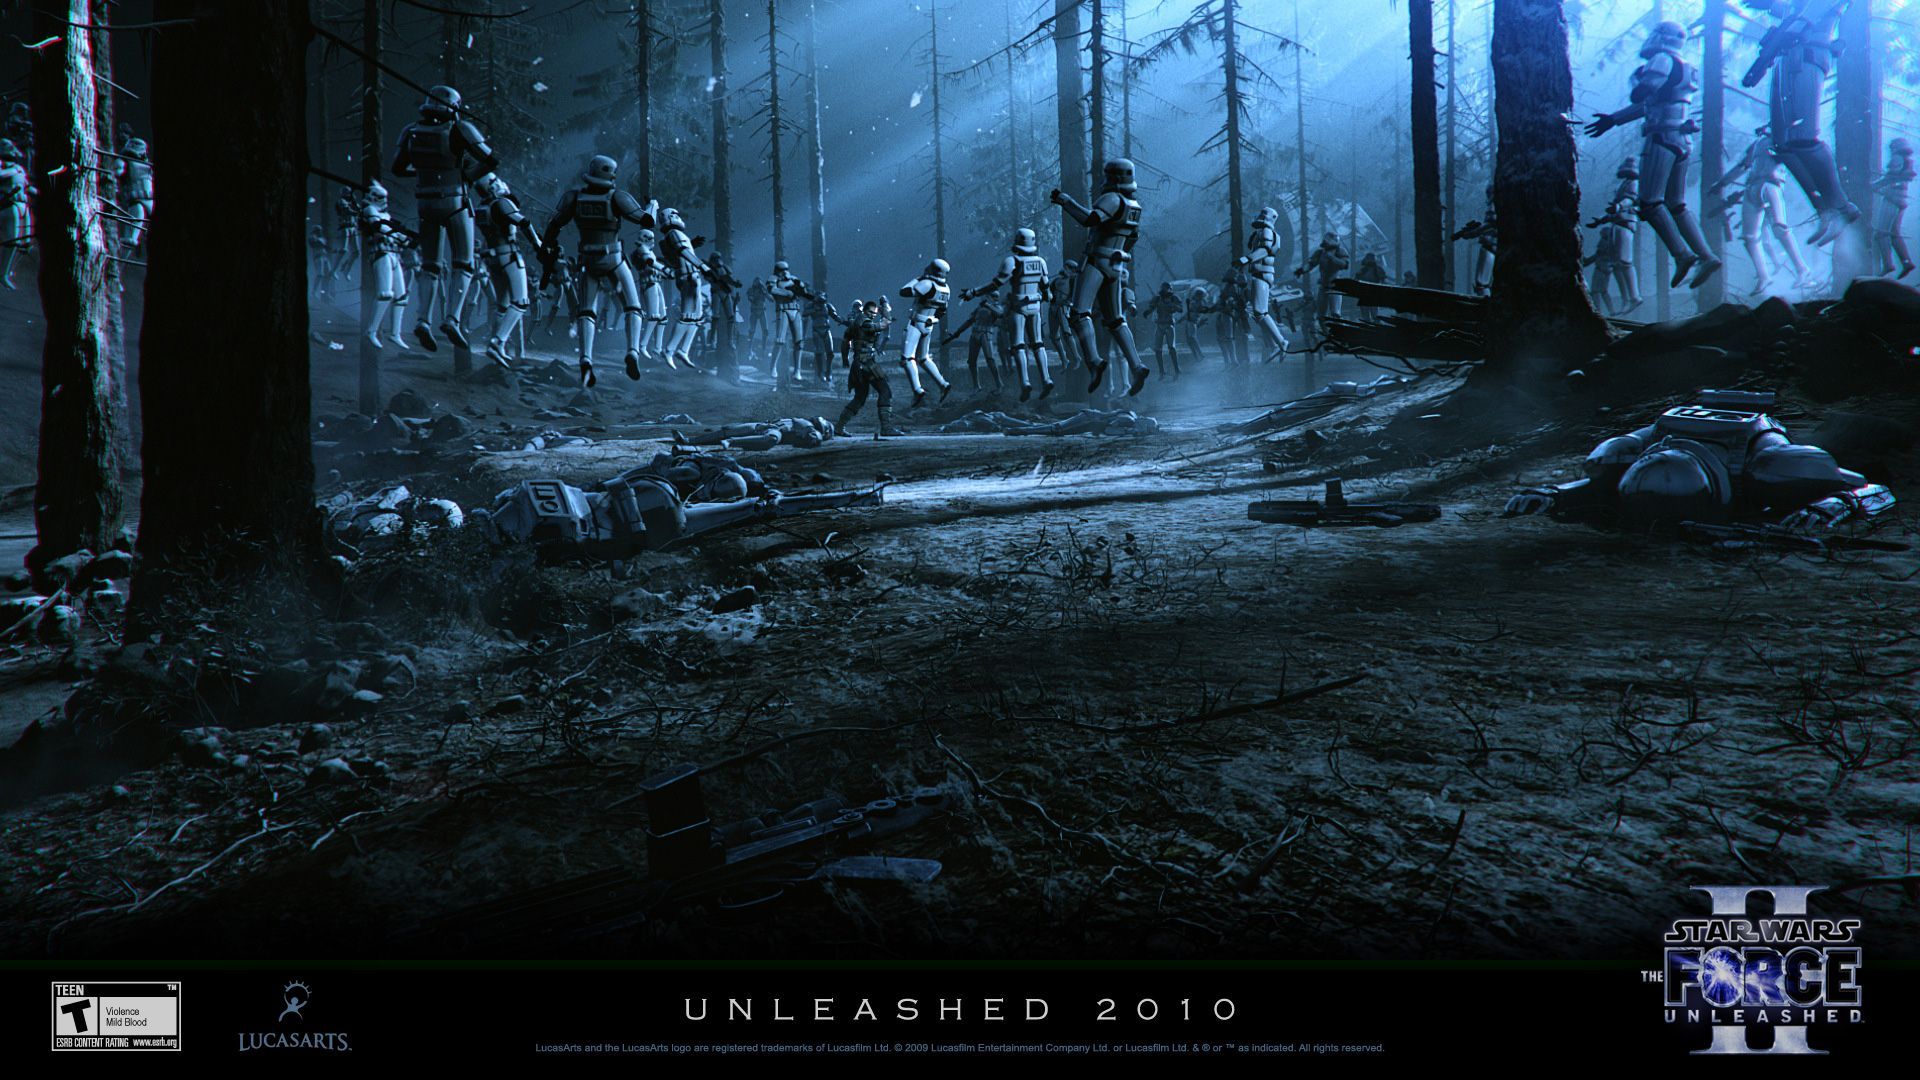 Force Unleashed 2 campaign. Star wars wallpaper, Star wars